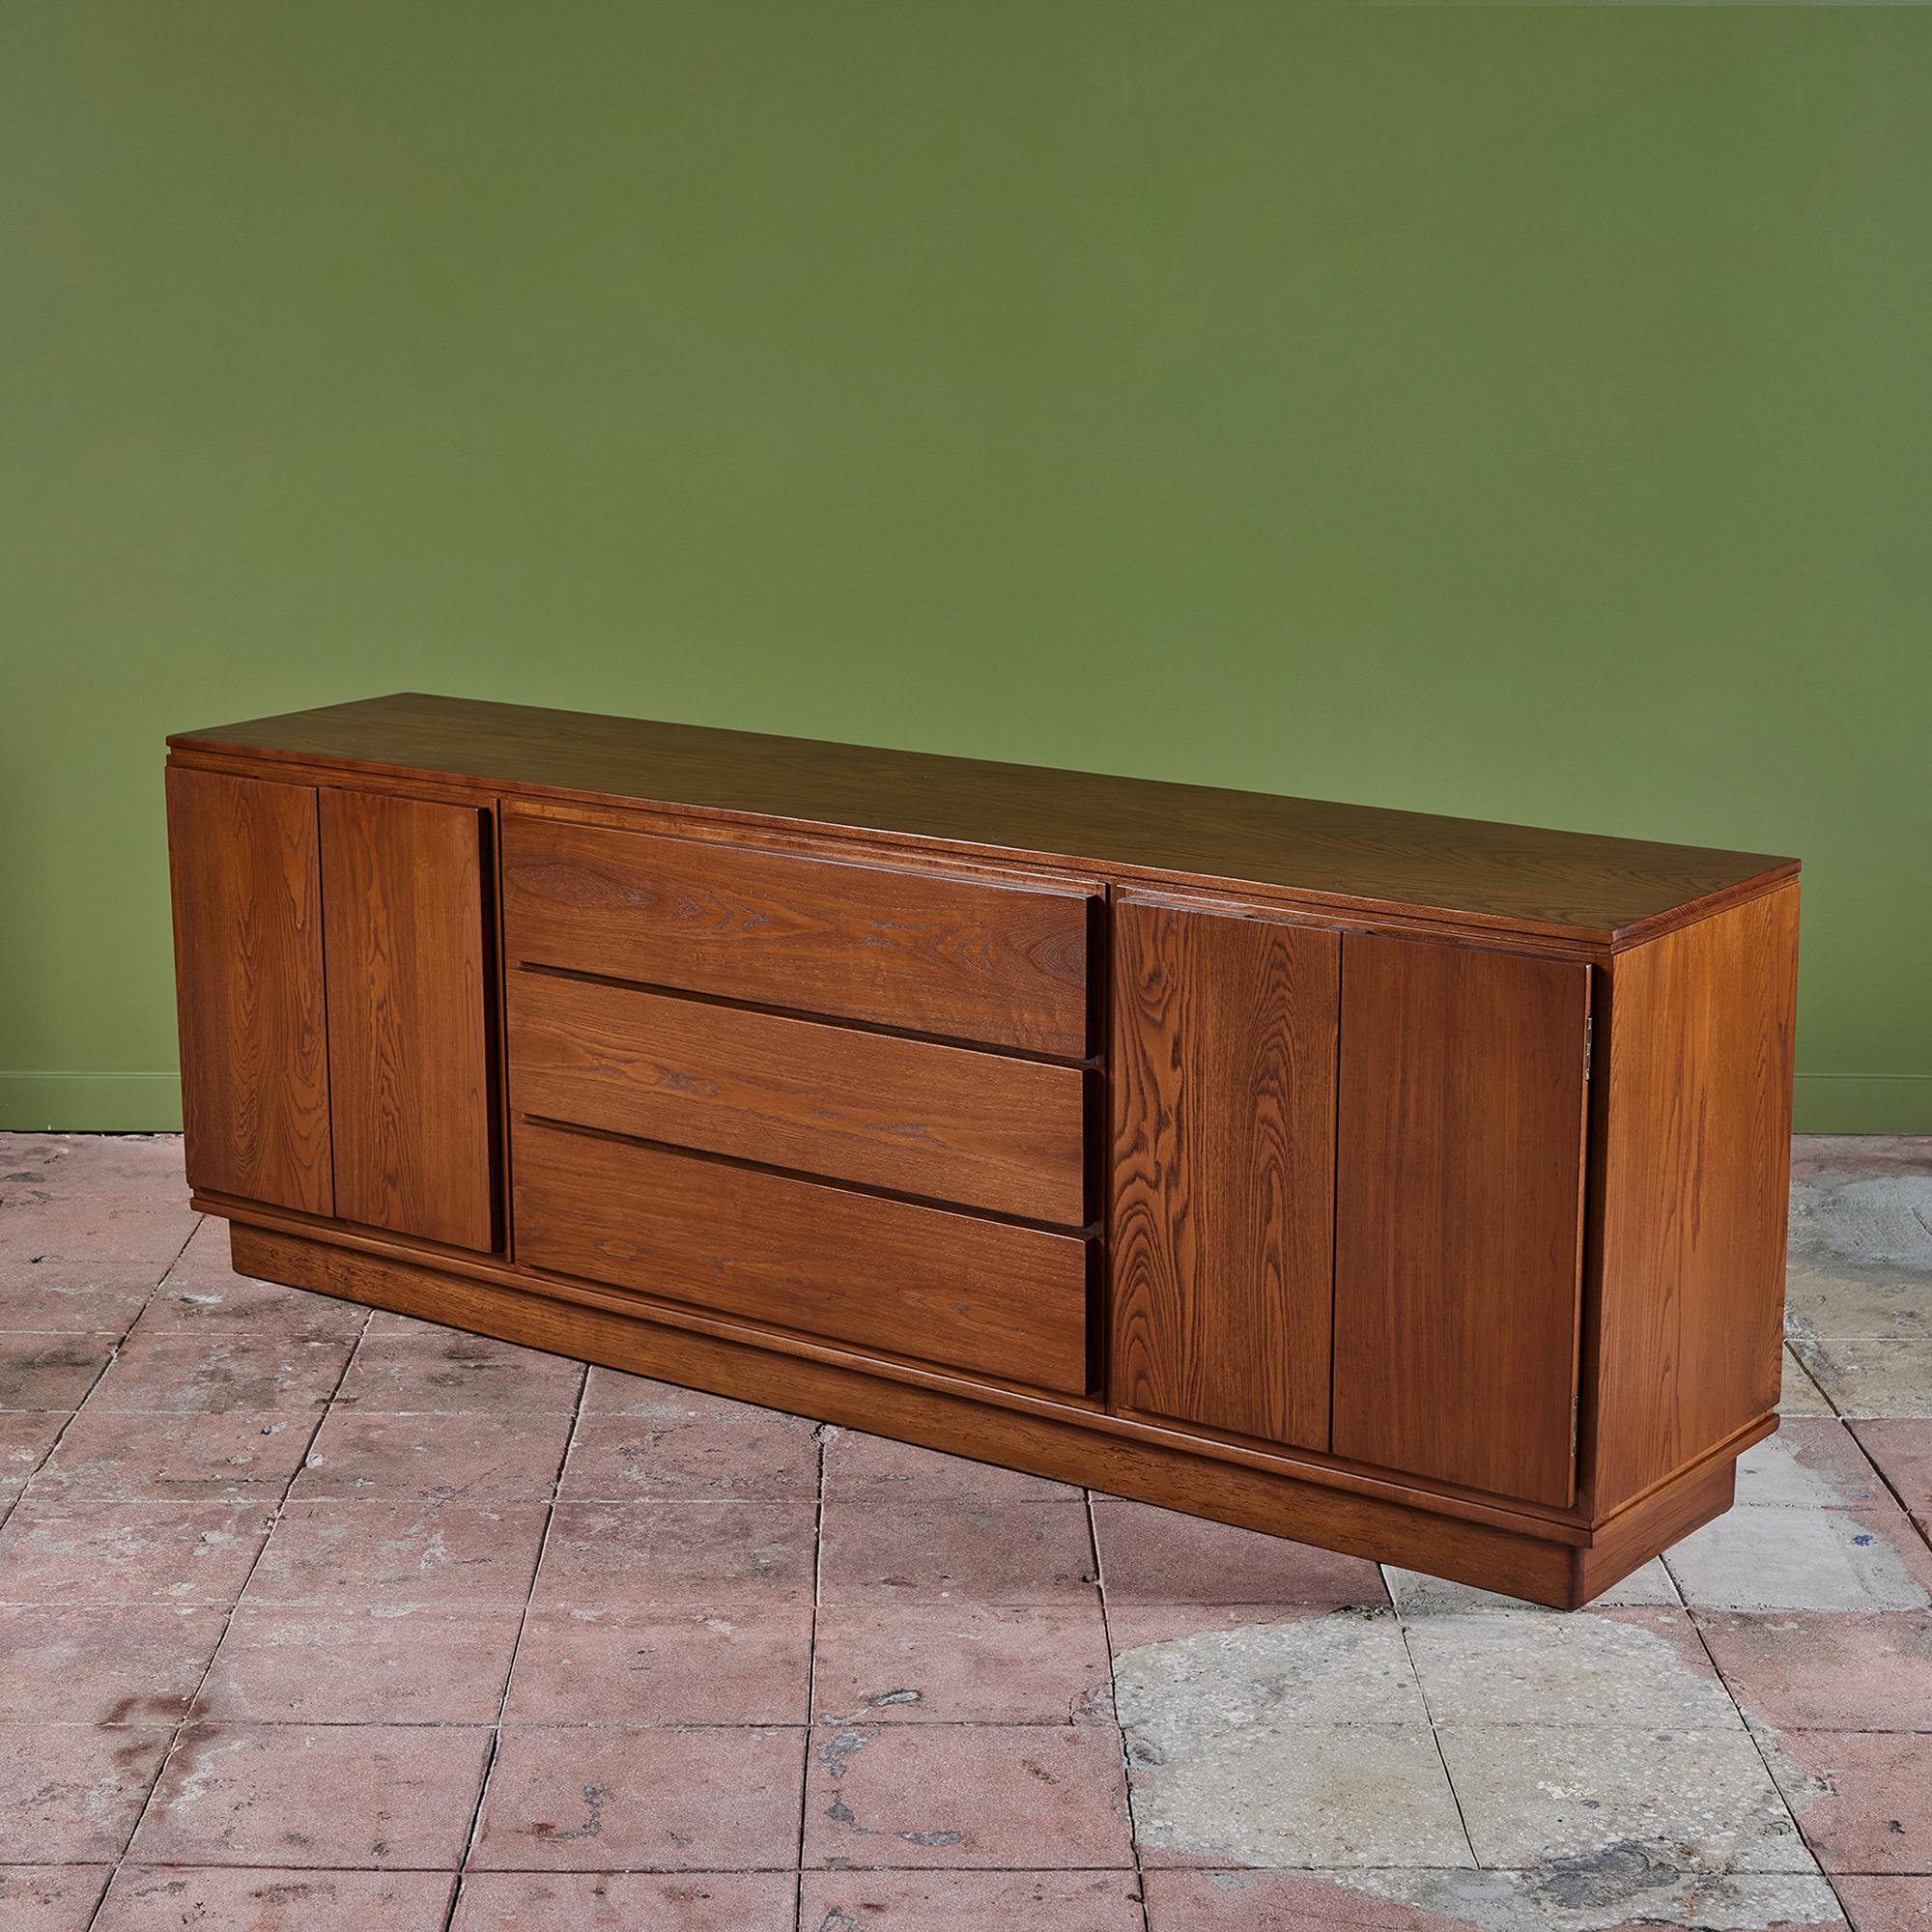 Solid Oak credenza features three drawers at the center of this case piece which are flanked by two door cabinets with interior shelving for additional storage. This piece is impressive in size with a length of 84